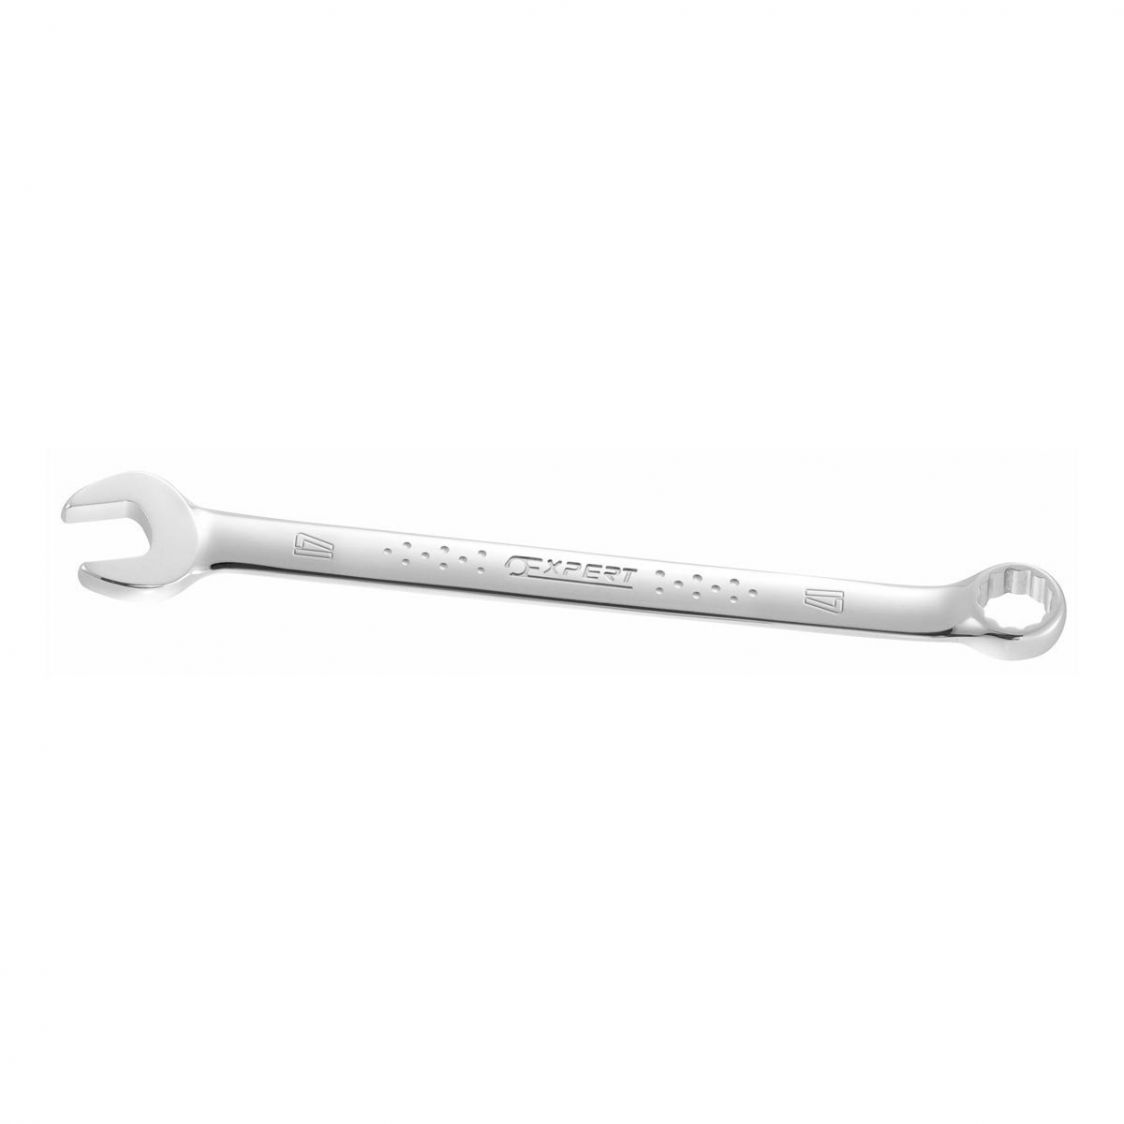 EXPERT by FACOM E117701 - 21mm Metric Long Combination Spanner